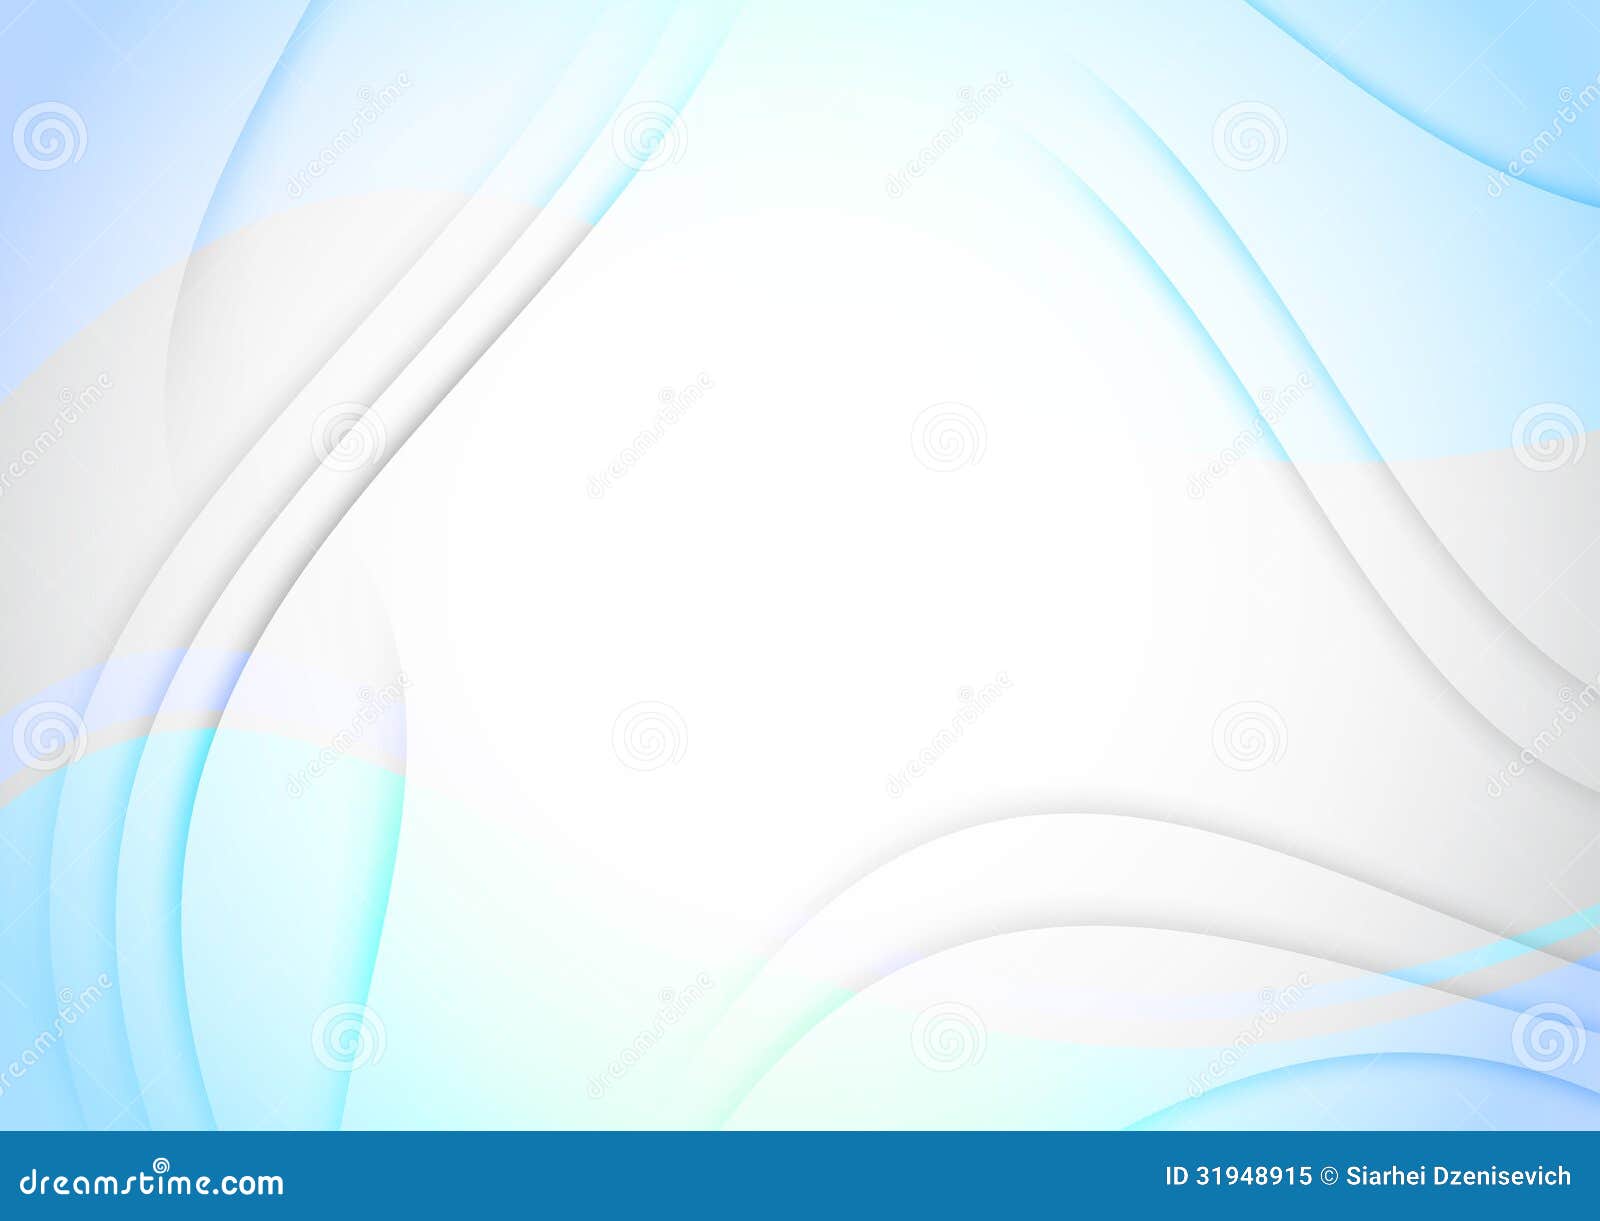 clipart background clear - photo #14